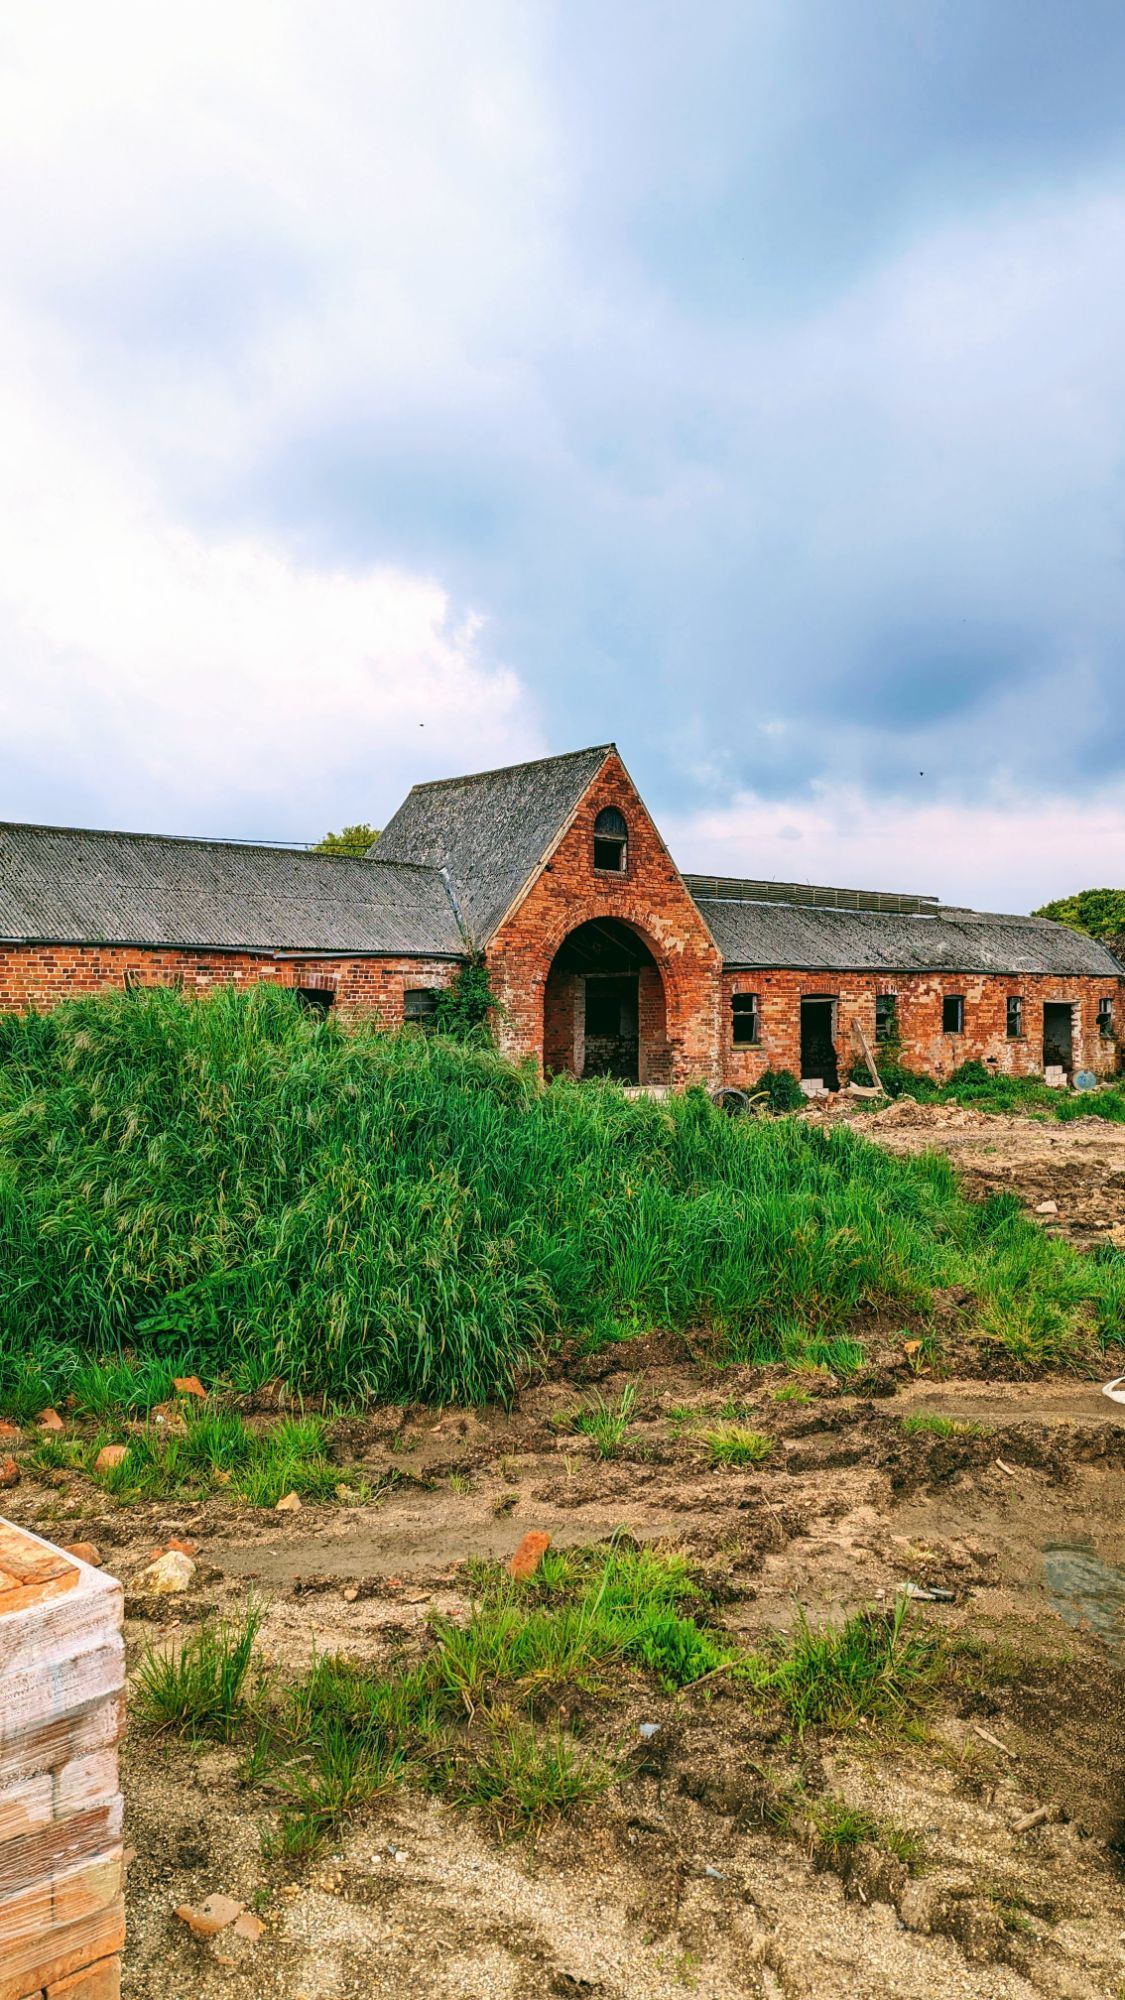 Planning Applications & Architectural Design: Everything you need to gain planning permission for your barn conversion â€“ including listed sites and heritage buildings.